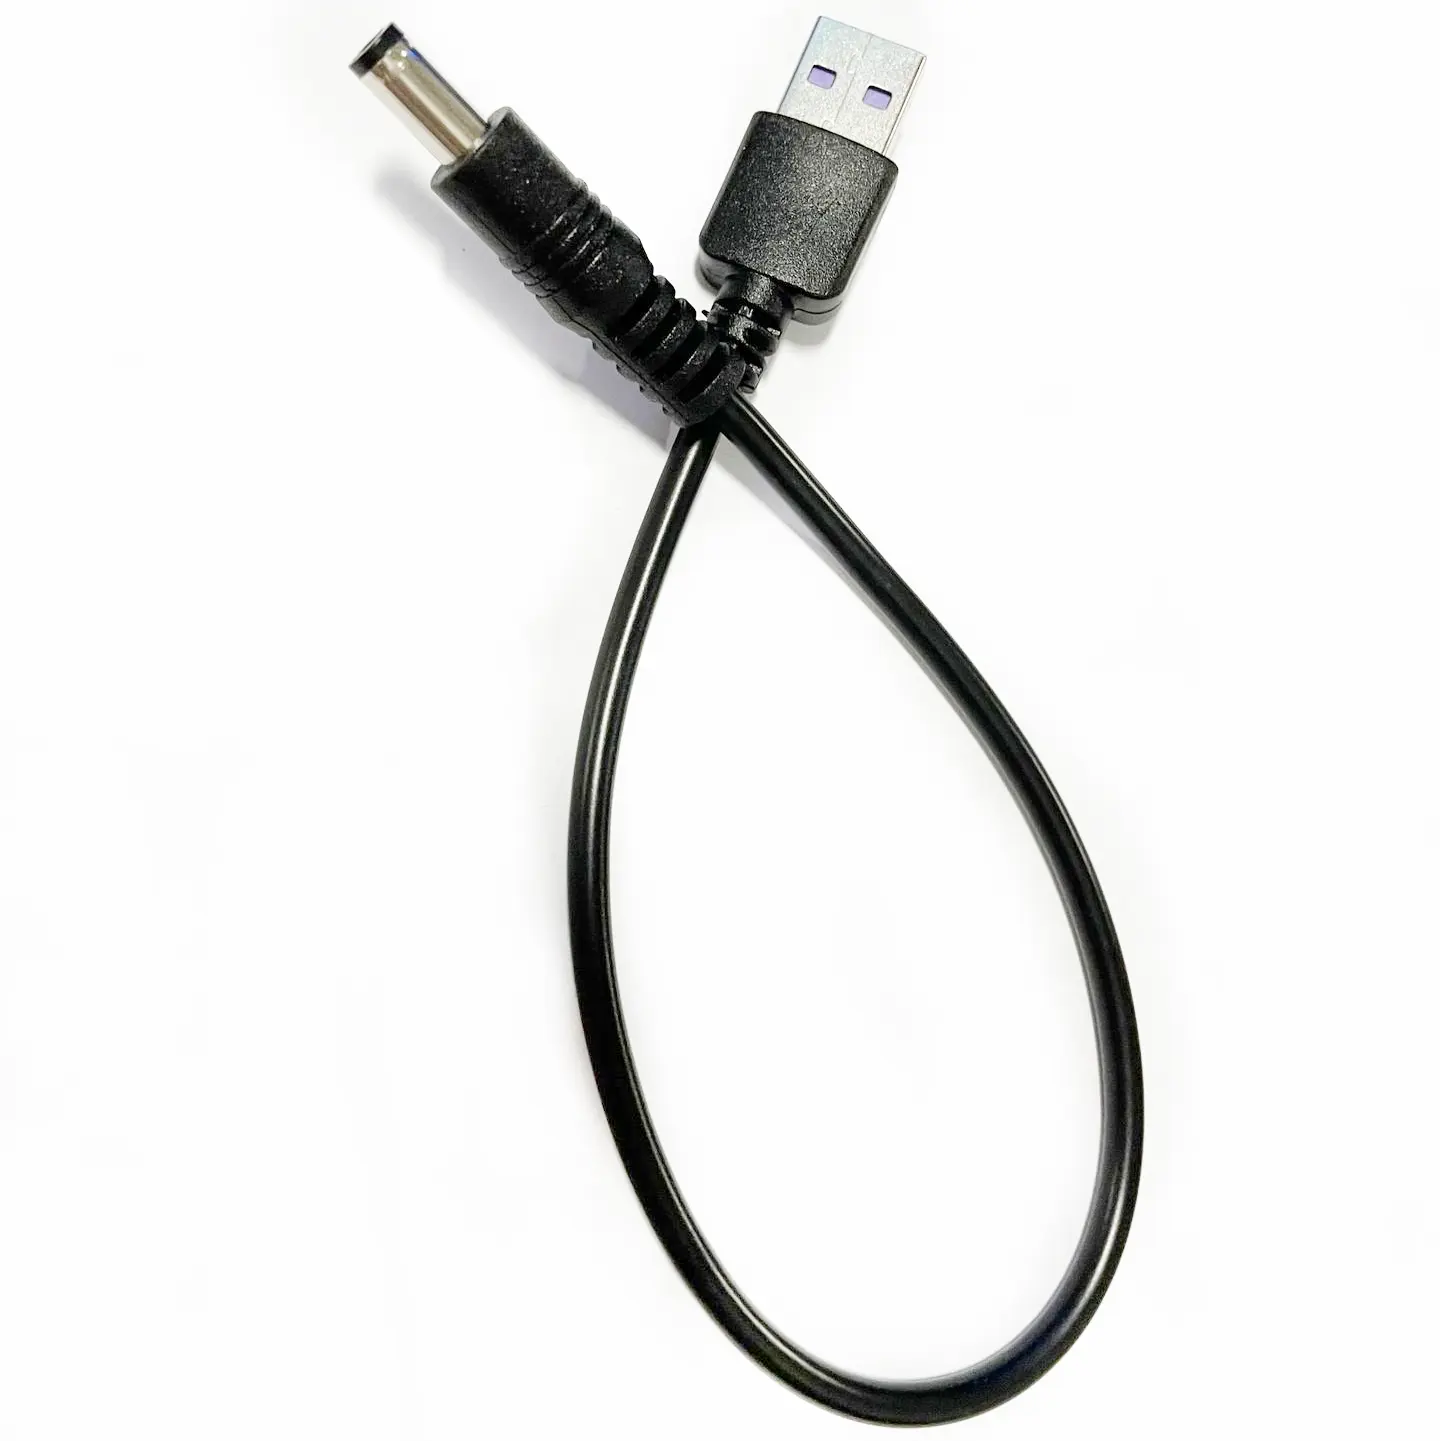 USB to DC Adapter Charger Power Cable Step up Converter with 5V to 12V DC Output Insulated PVC Straight Wire